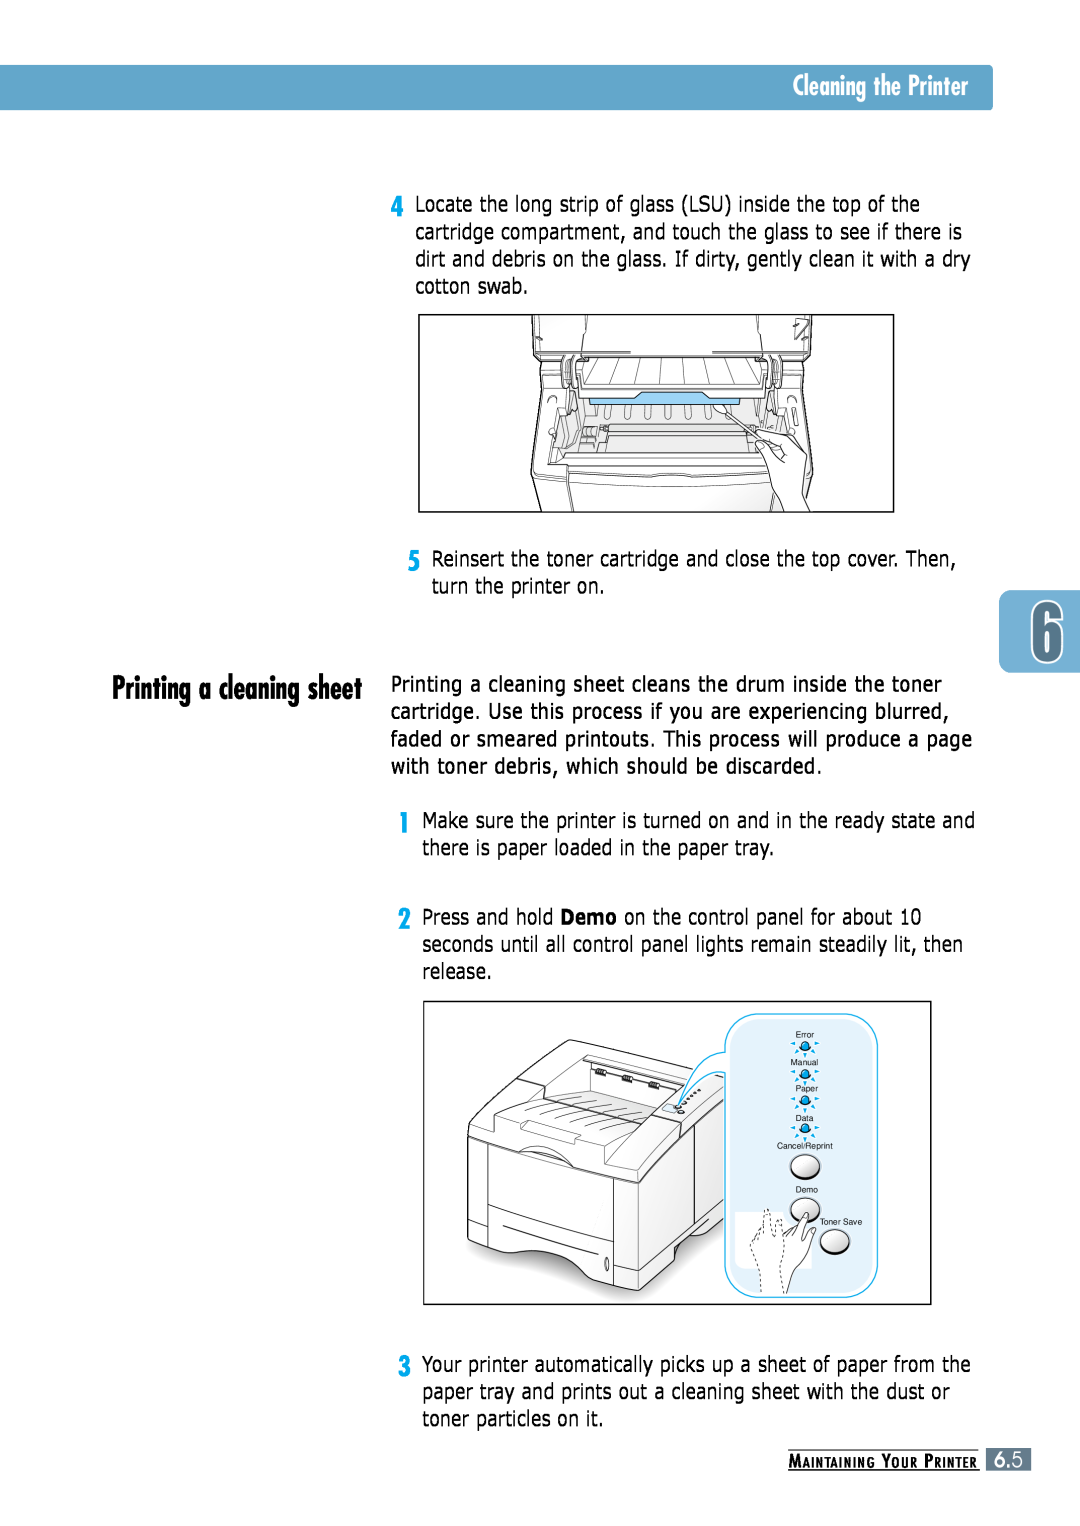 Samsung ML-6060N, ML-6060S manual Cleaning the Printer, Printing a cleaning sheet 